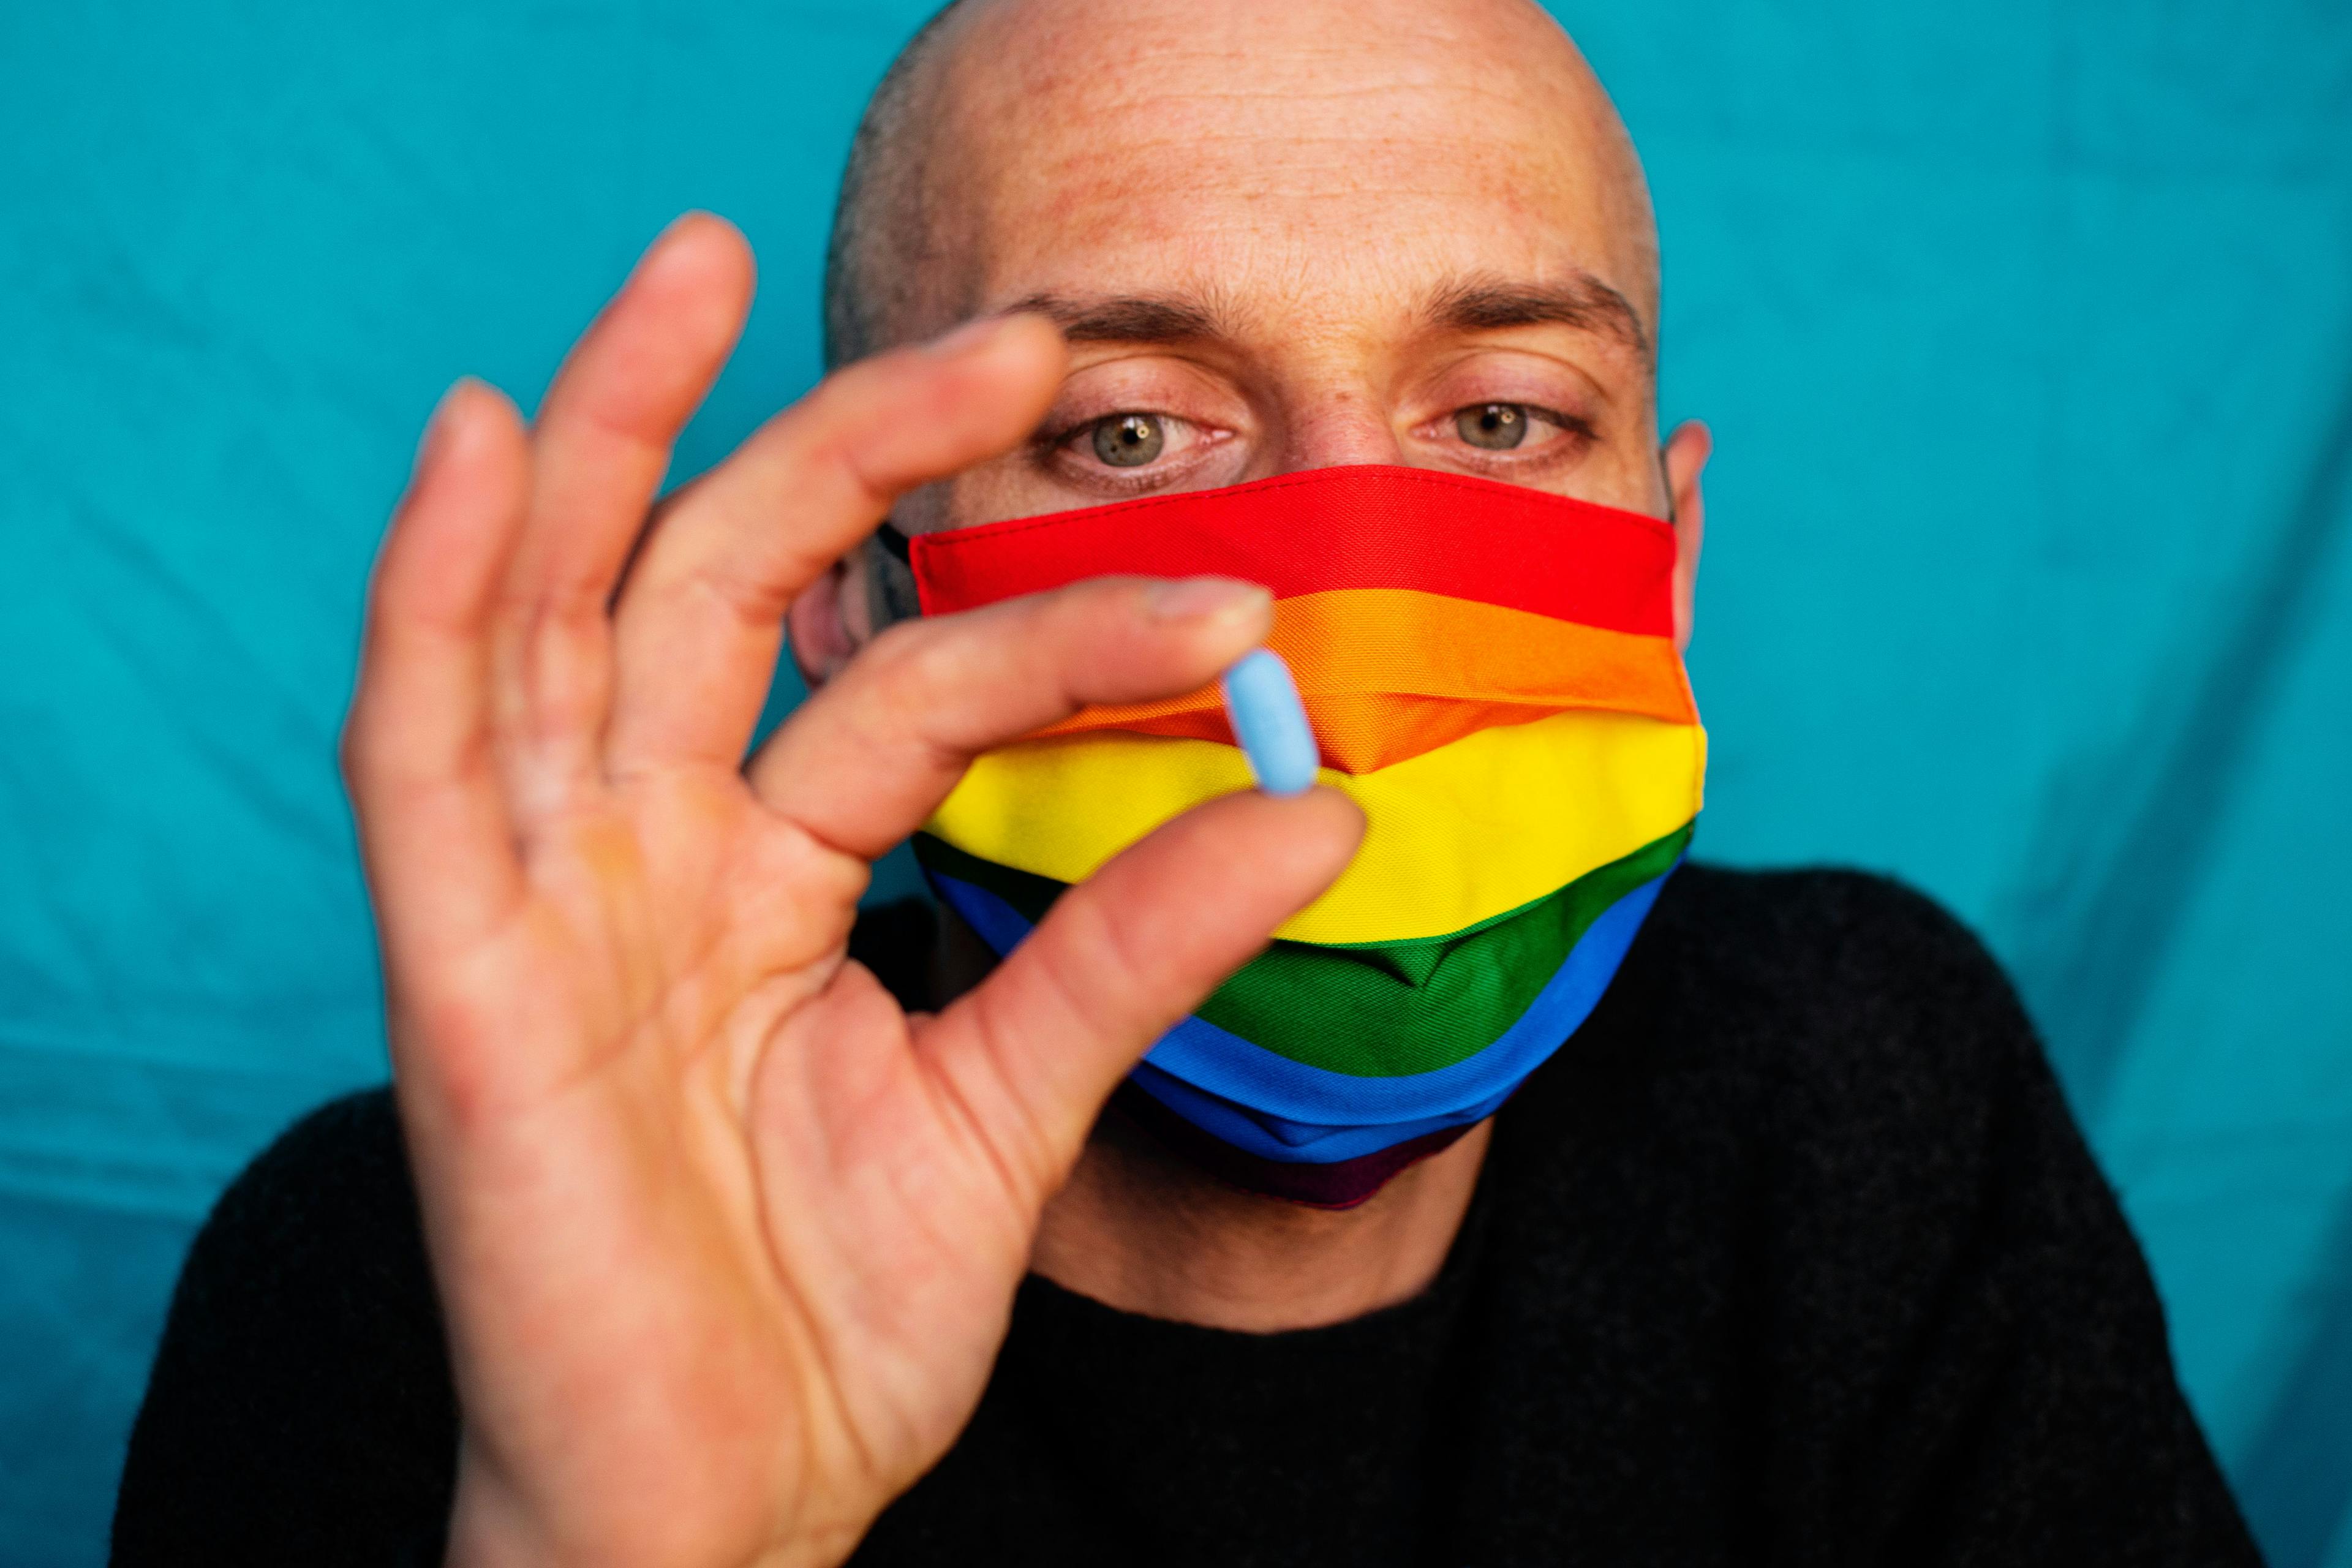 Due to HIV pre-exposure prophylaxis (PrEP) rollout and beginning antiretroviral therapy at diagnosis, the UK is on track to eliminate new HIV infections among gay and bisexual men in approximately 25 years.